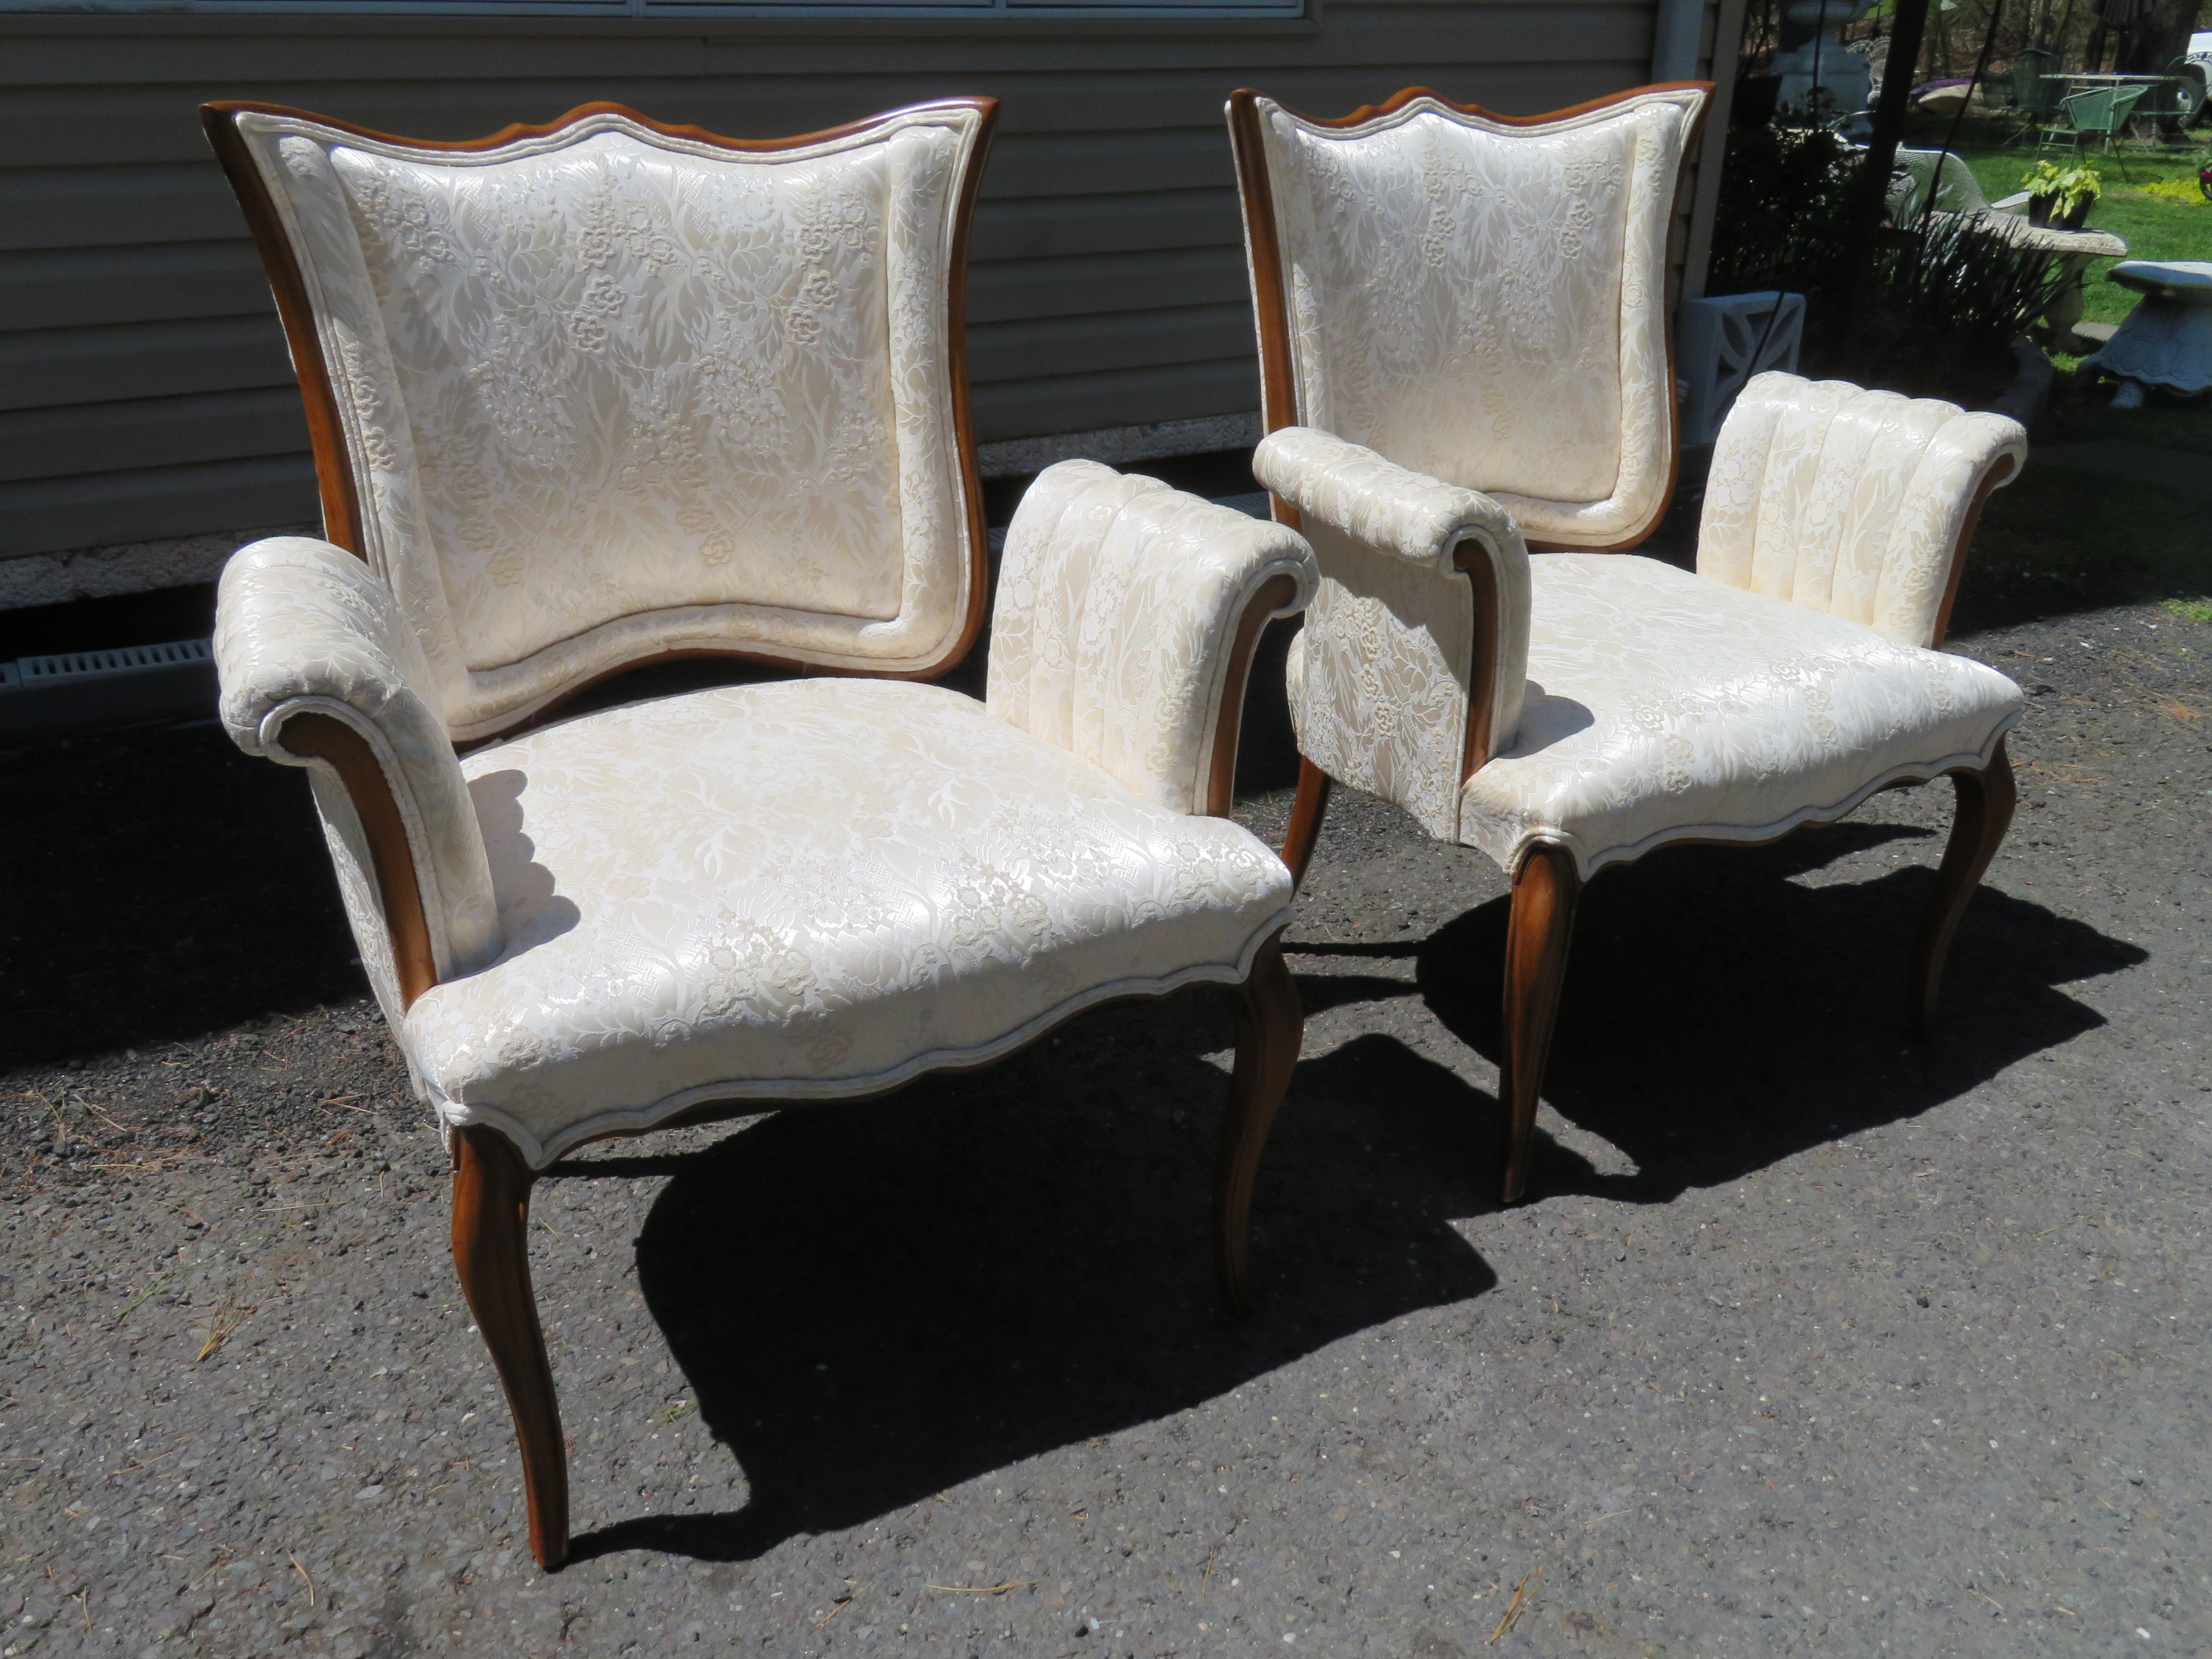 Lovely pair of Hollywood Regency scroll arm lounge chairs with shield-shaped backs. These elegant chairs have all the quality and craftsmanship of other pieces we have made by Grosfeld House. They measure 36.5